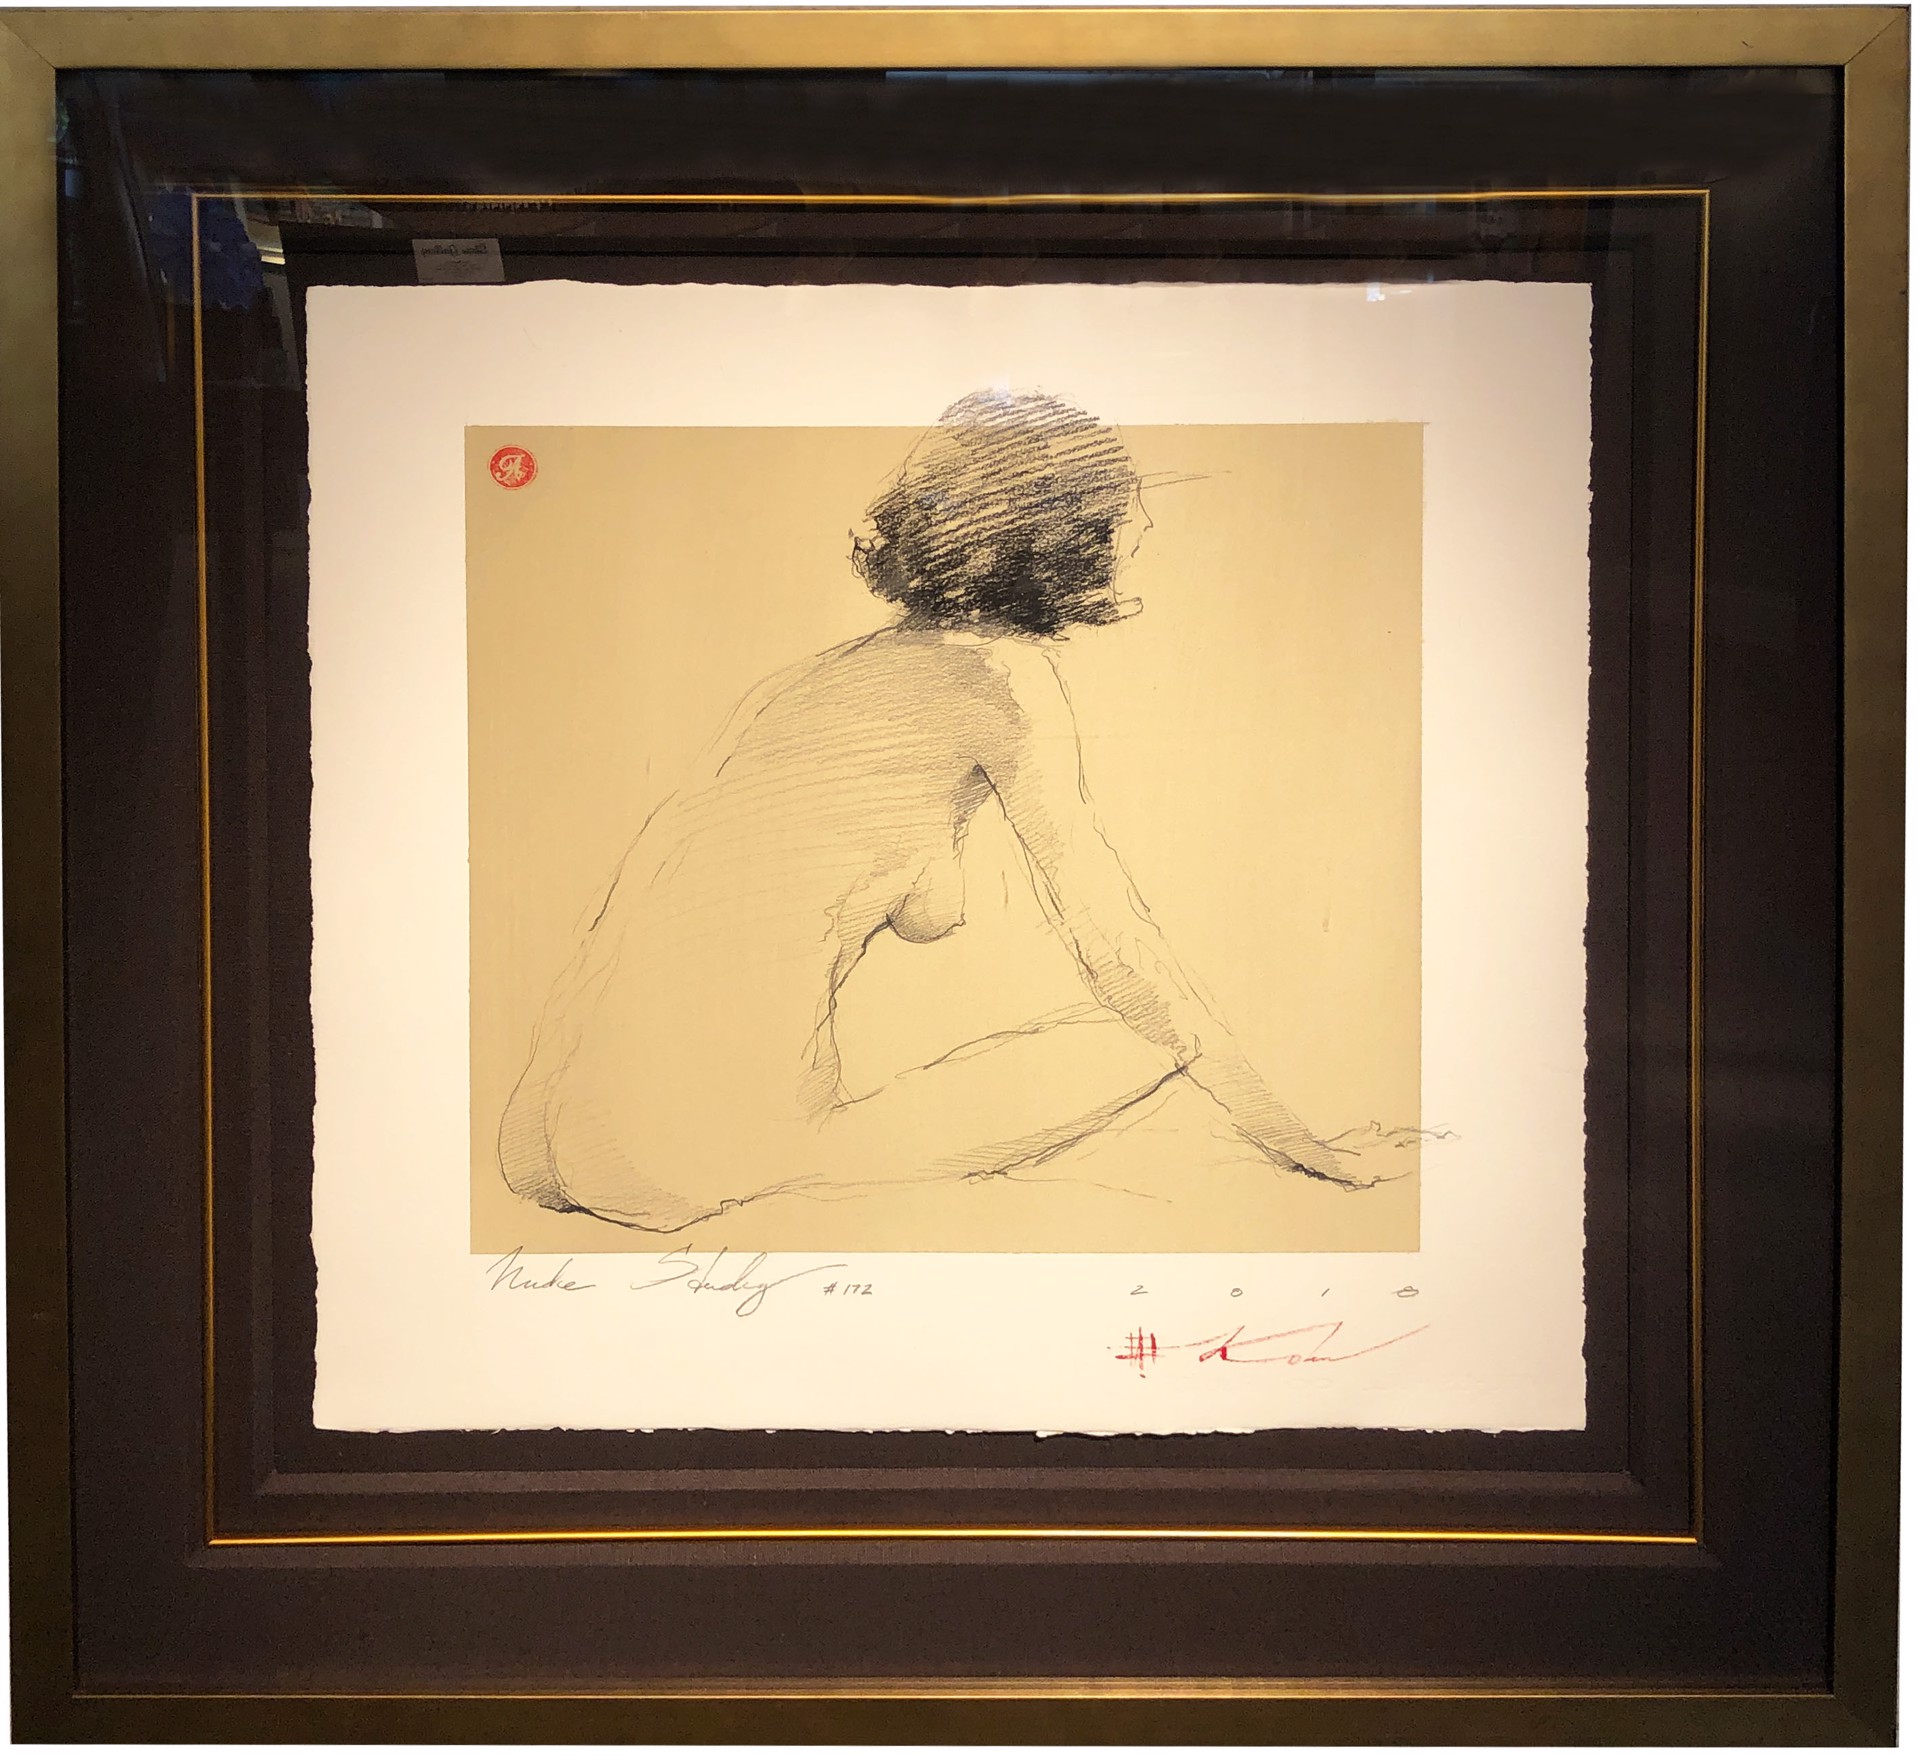 "Nude Study" #172 by Andre Kohn